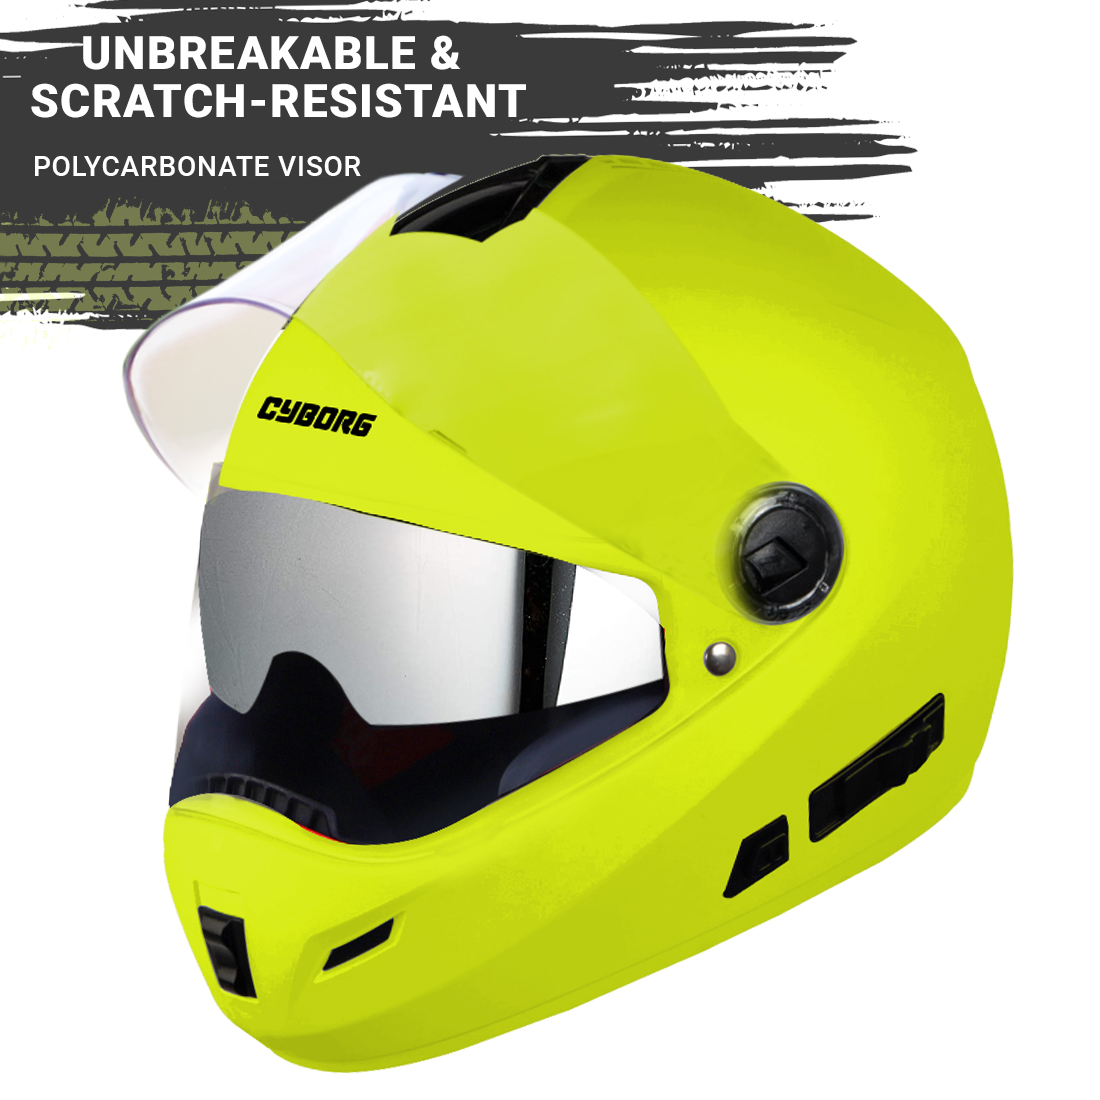 Steelbird SB-39 Cyborg ISI Certified Full Face Helmet For Men And Women With Sun Shield (Glossy Fluo Neon)